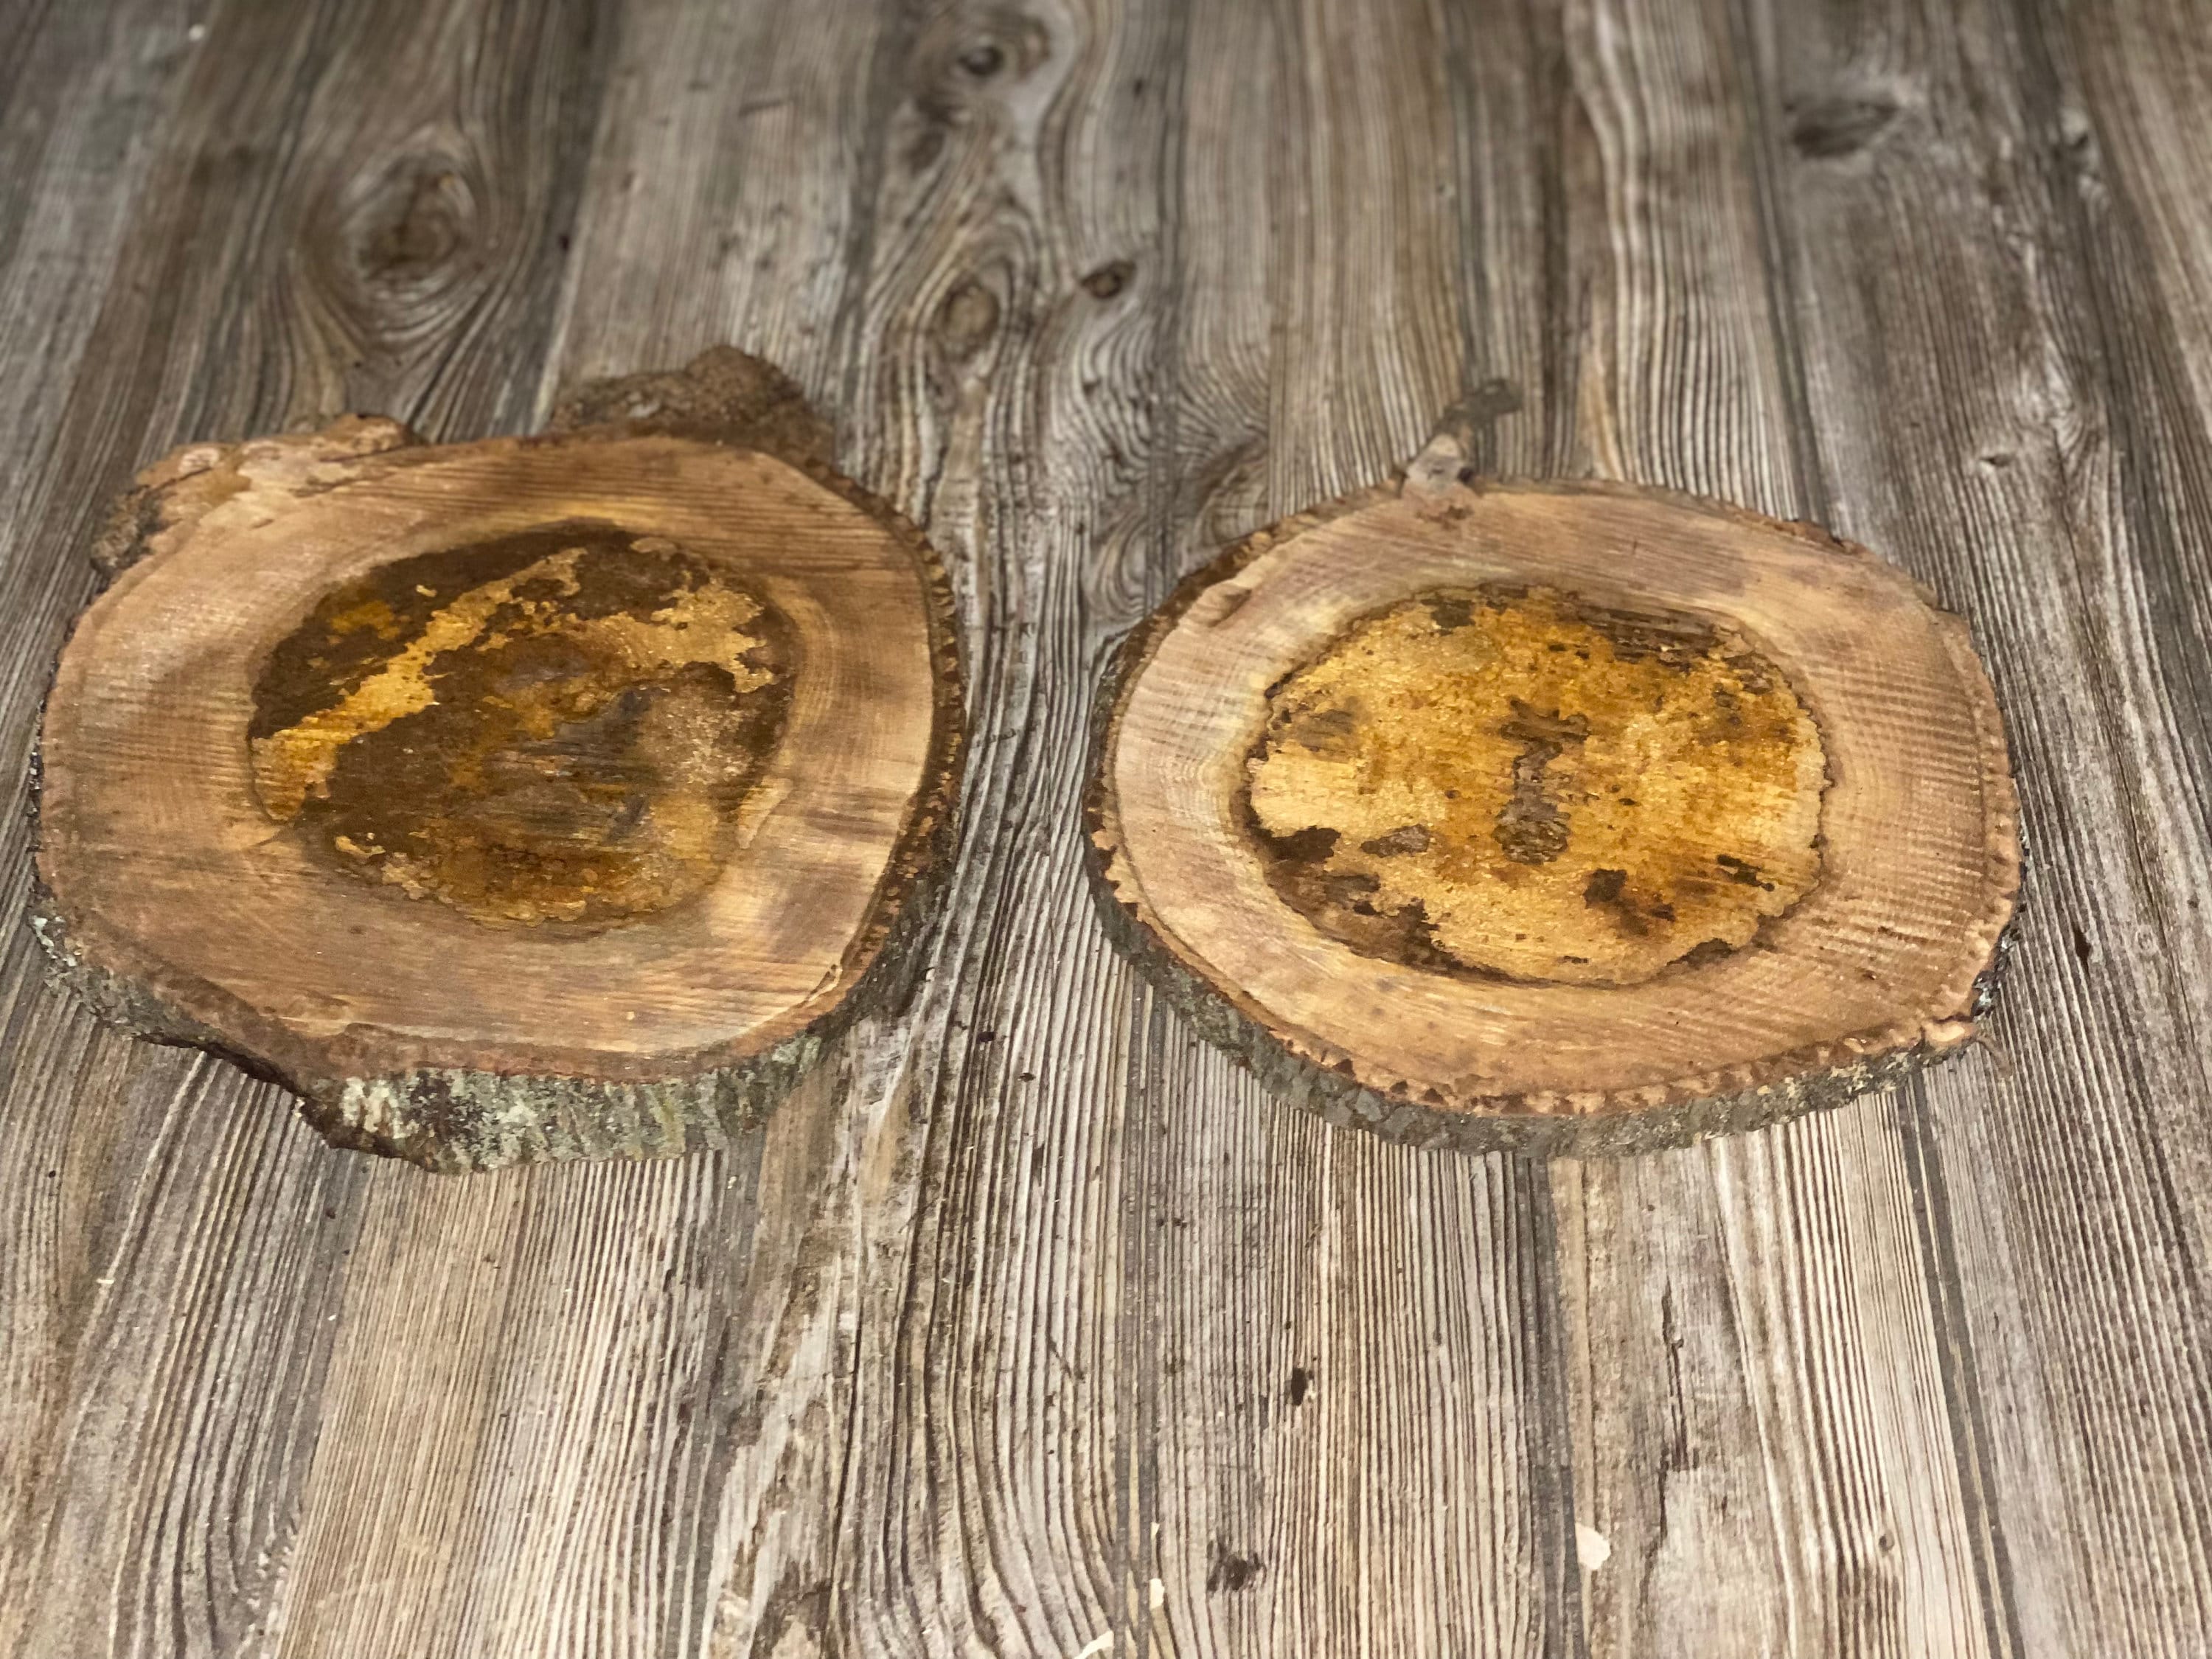 Two Hickory Burl Slices, Approximately 10.5-12.5 Inches Long by 10 Inches Wide and 3/4 Inch Thick